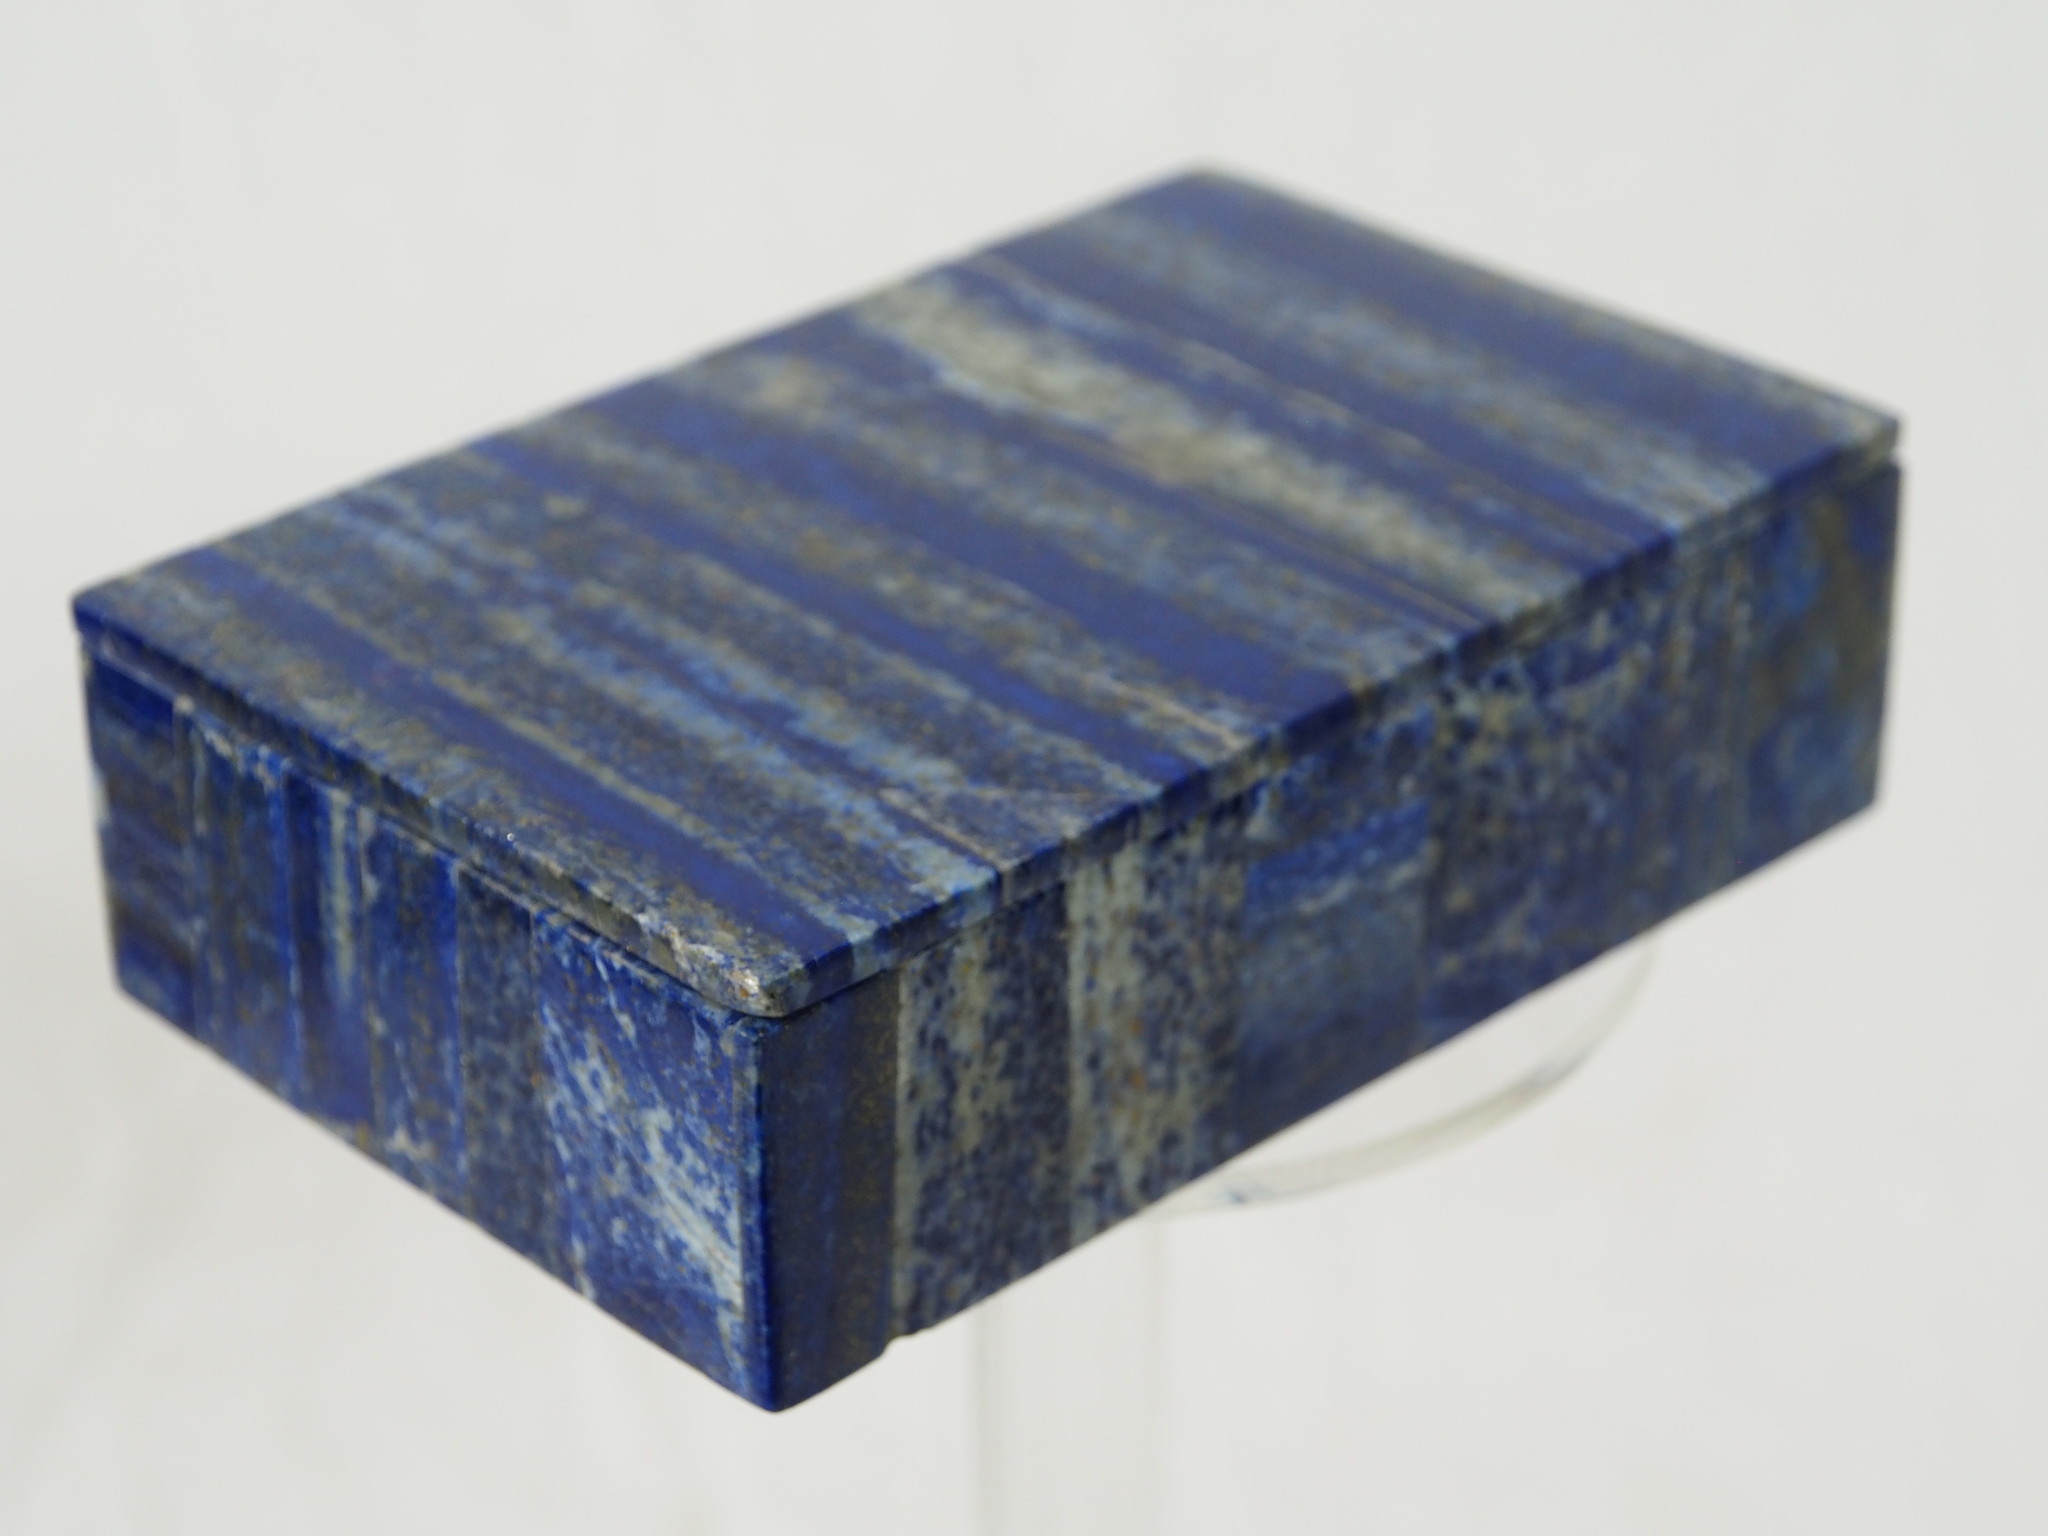 Hand Crafted stunning genuine Afghan Lapis Lazuli Gemstone  Box   from Afghanistan No: 21/F